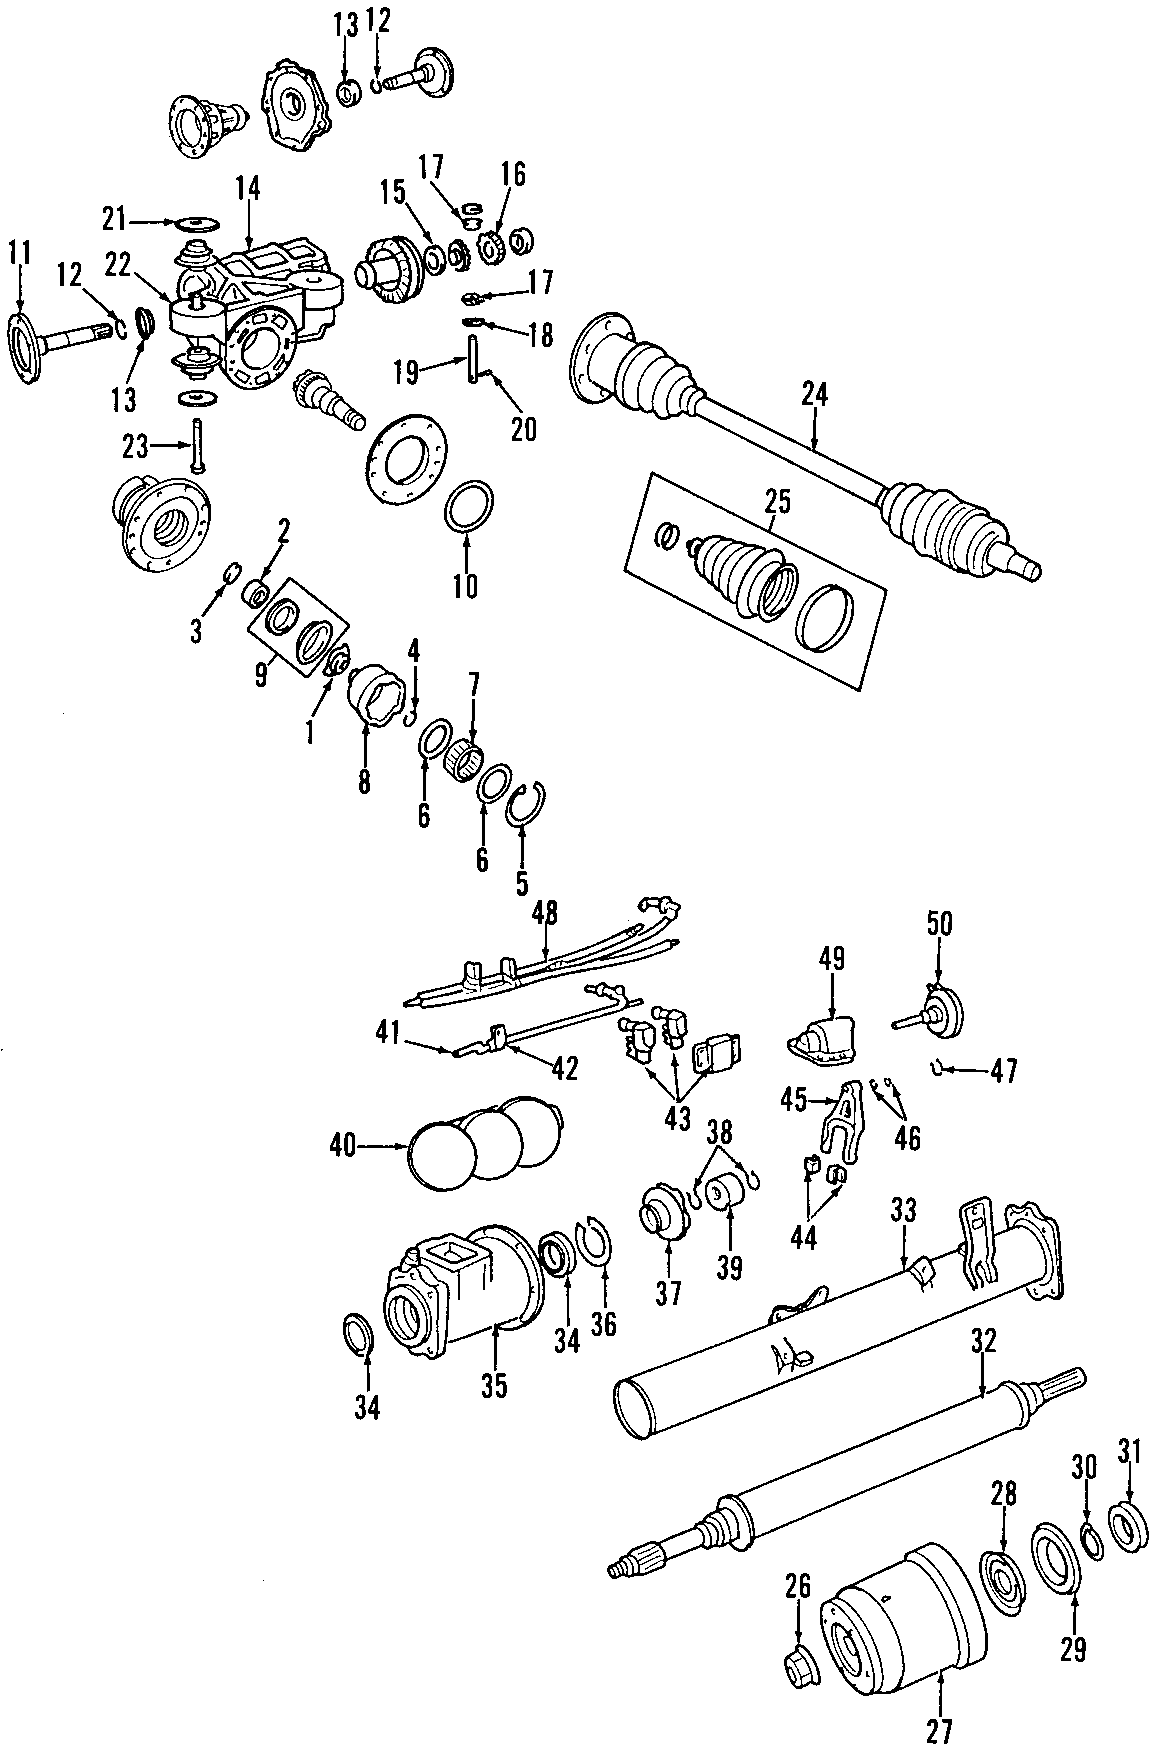 44DRIVE AXLES. REAR AXLE. AXLE SHAFTS & JOINTS. DIFFERENTIAL. PROPELLER SHAFT.https://images.simplepart.com/images/parts/motor/fullsize/T040085.png